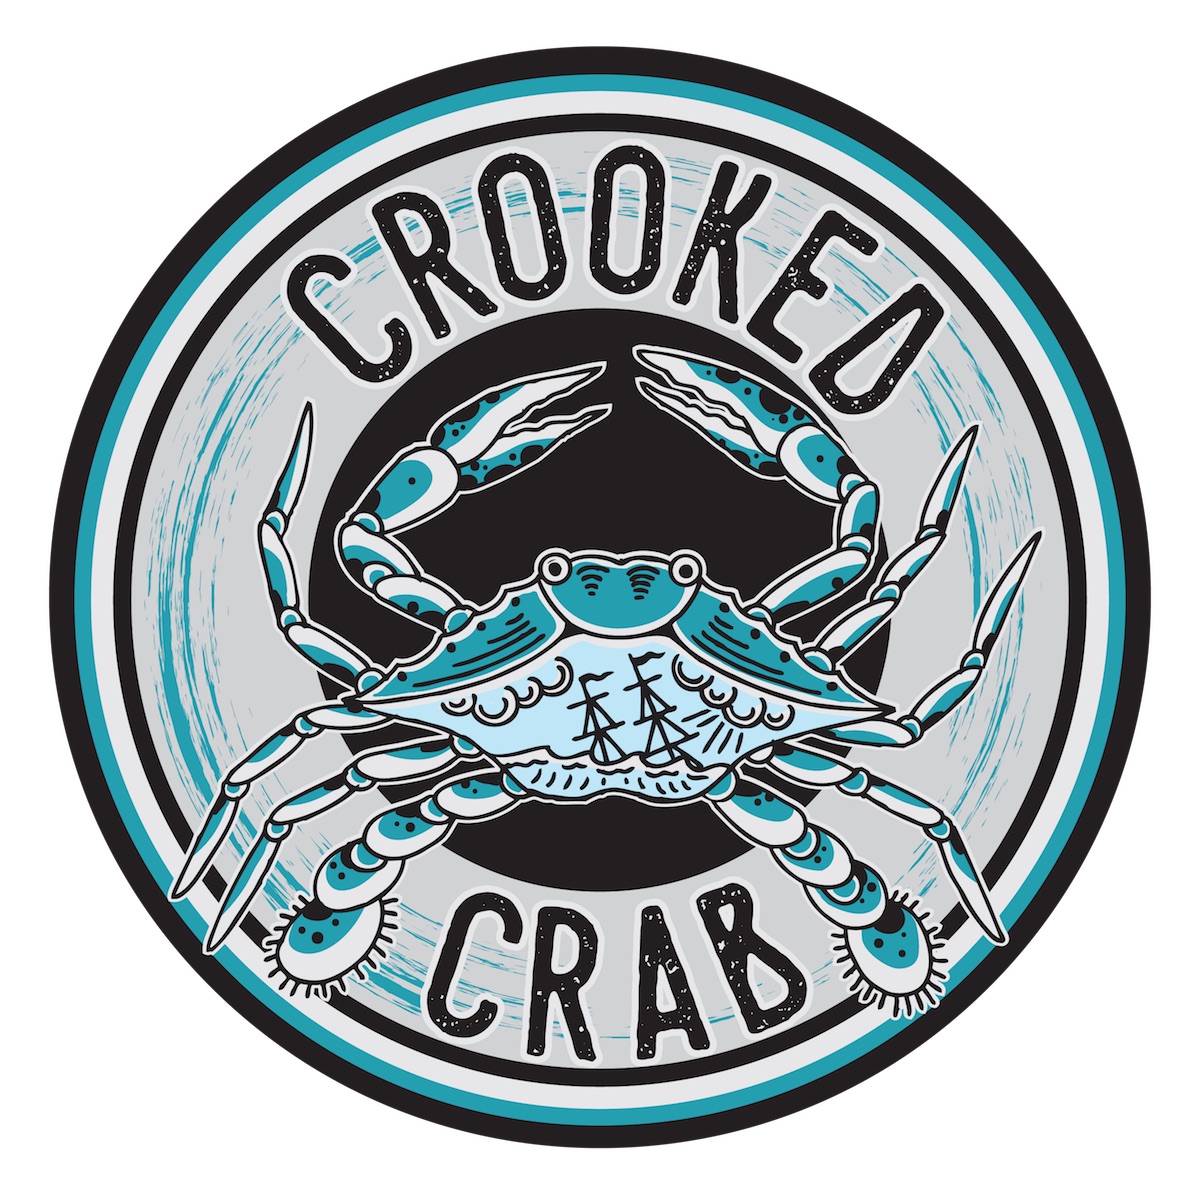 Crooked Crab Brewing Company